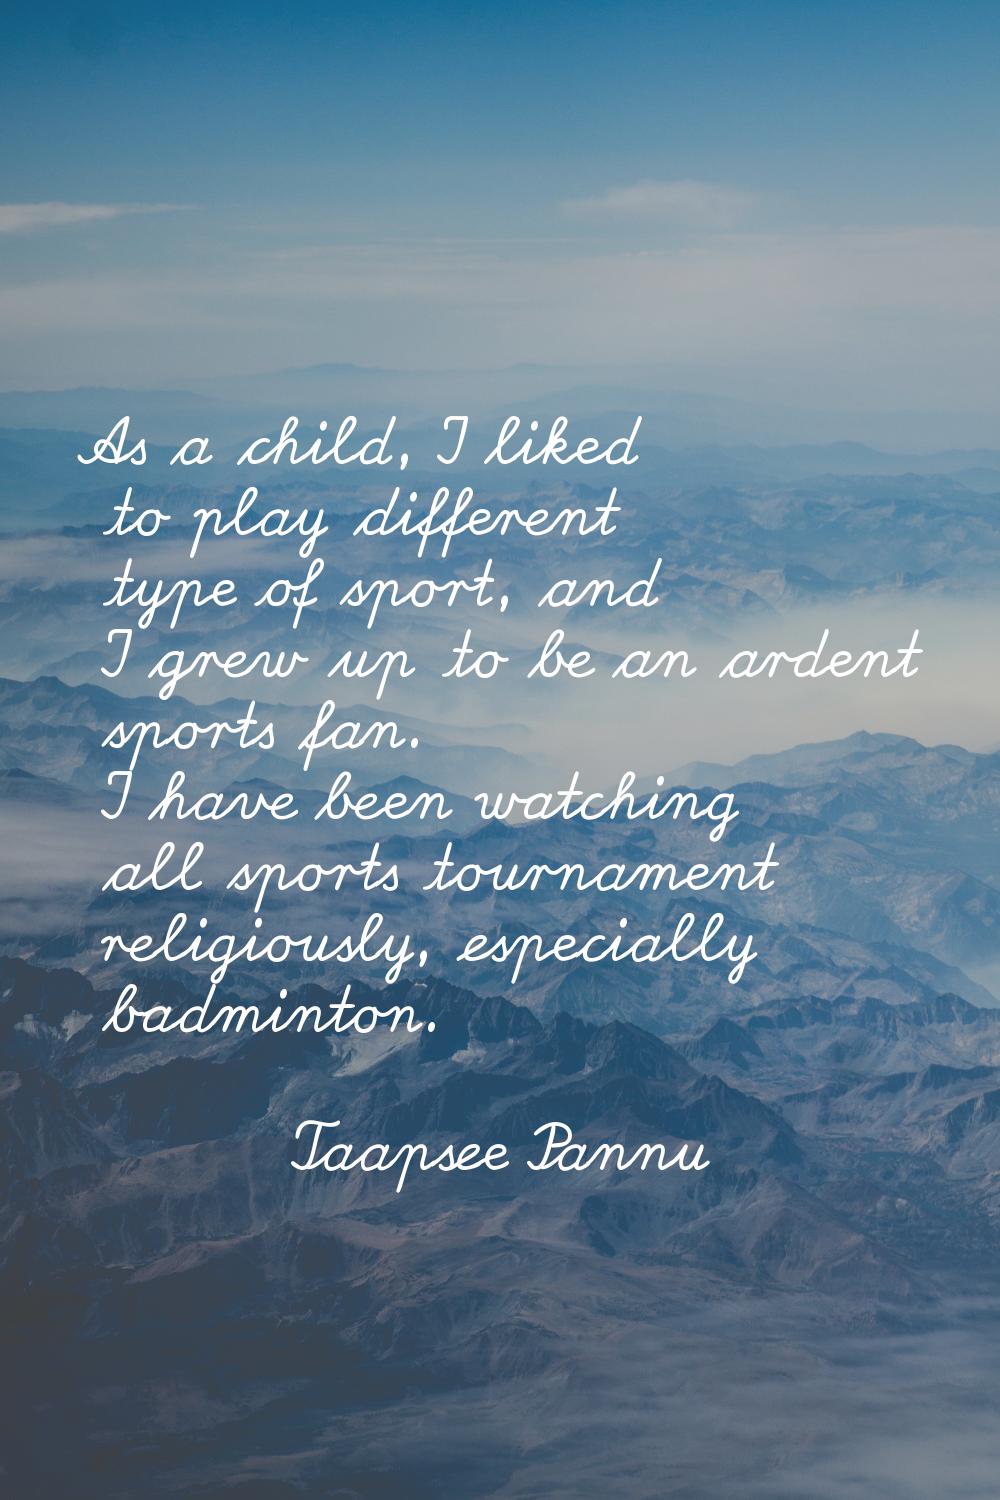 As a child, I liked to play different type of sport, and I grew up to be an ardent sports fan. I ha